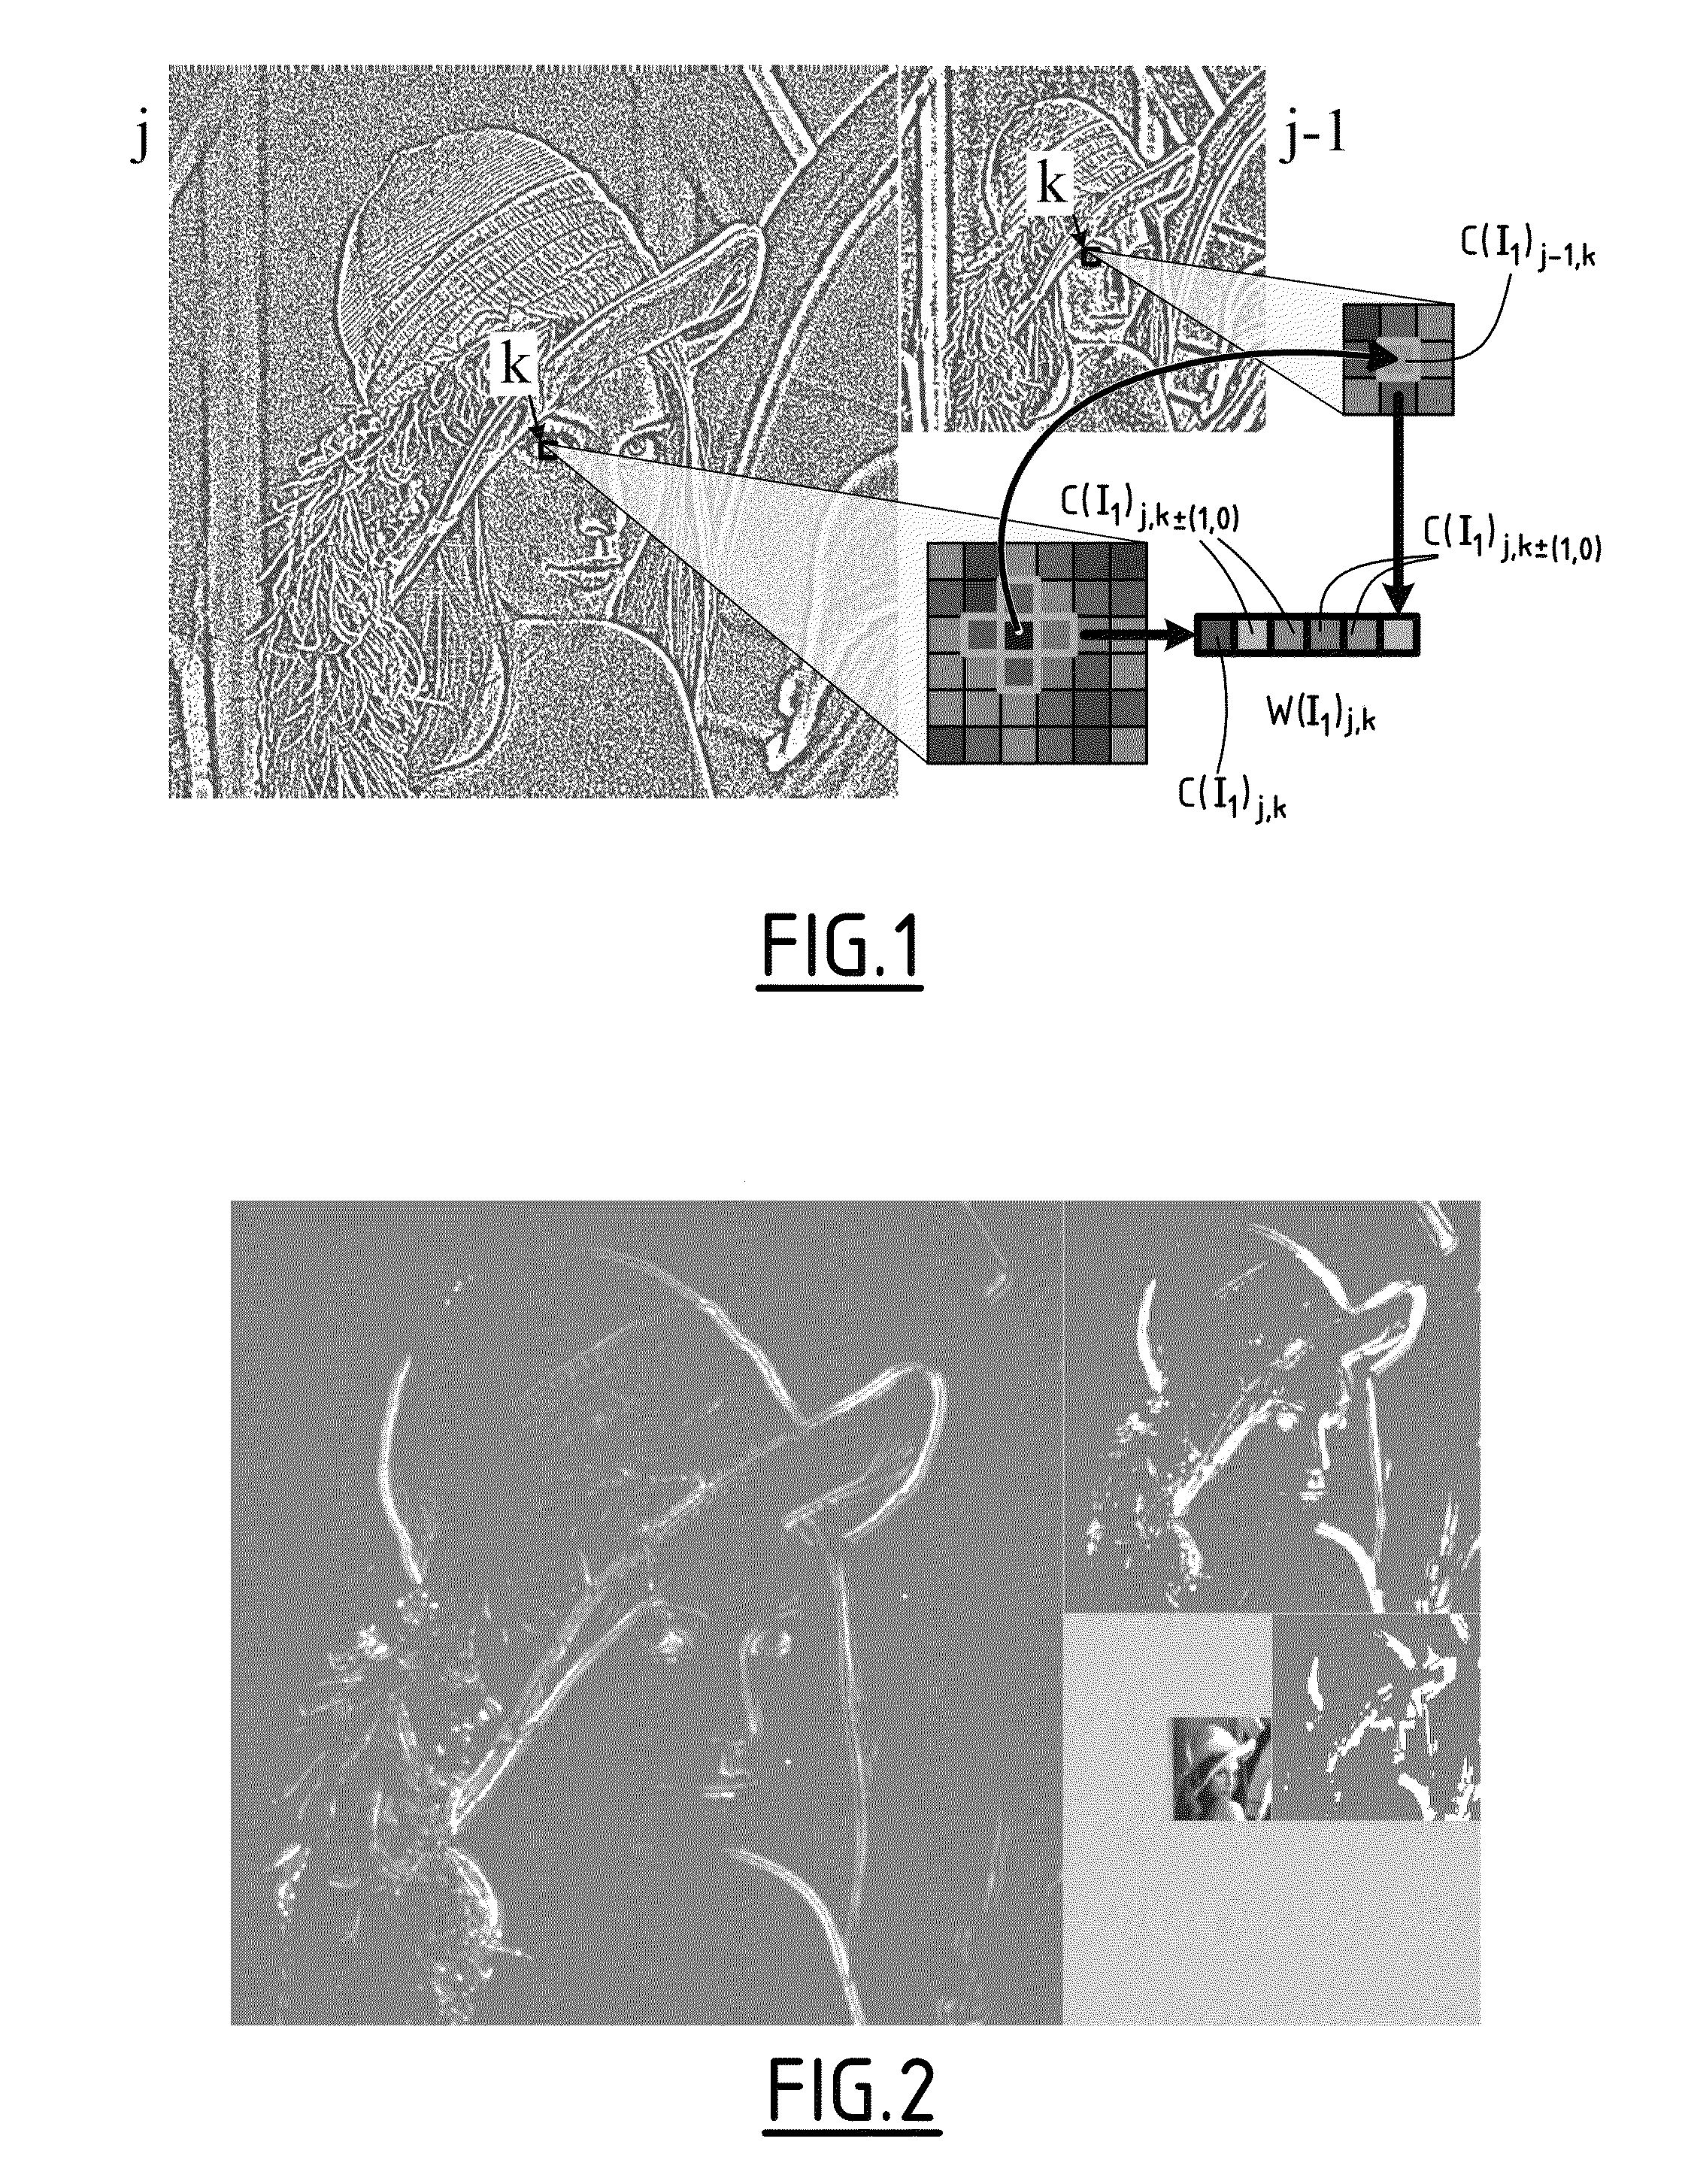 Method for measuring the dissimilarity between a first and a second images and a first and second video sequences